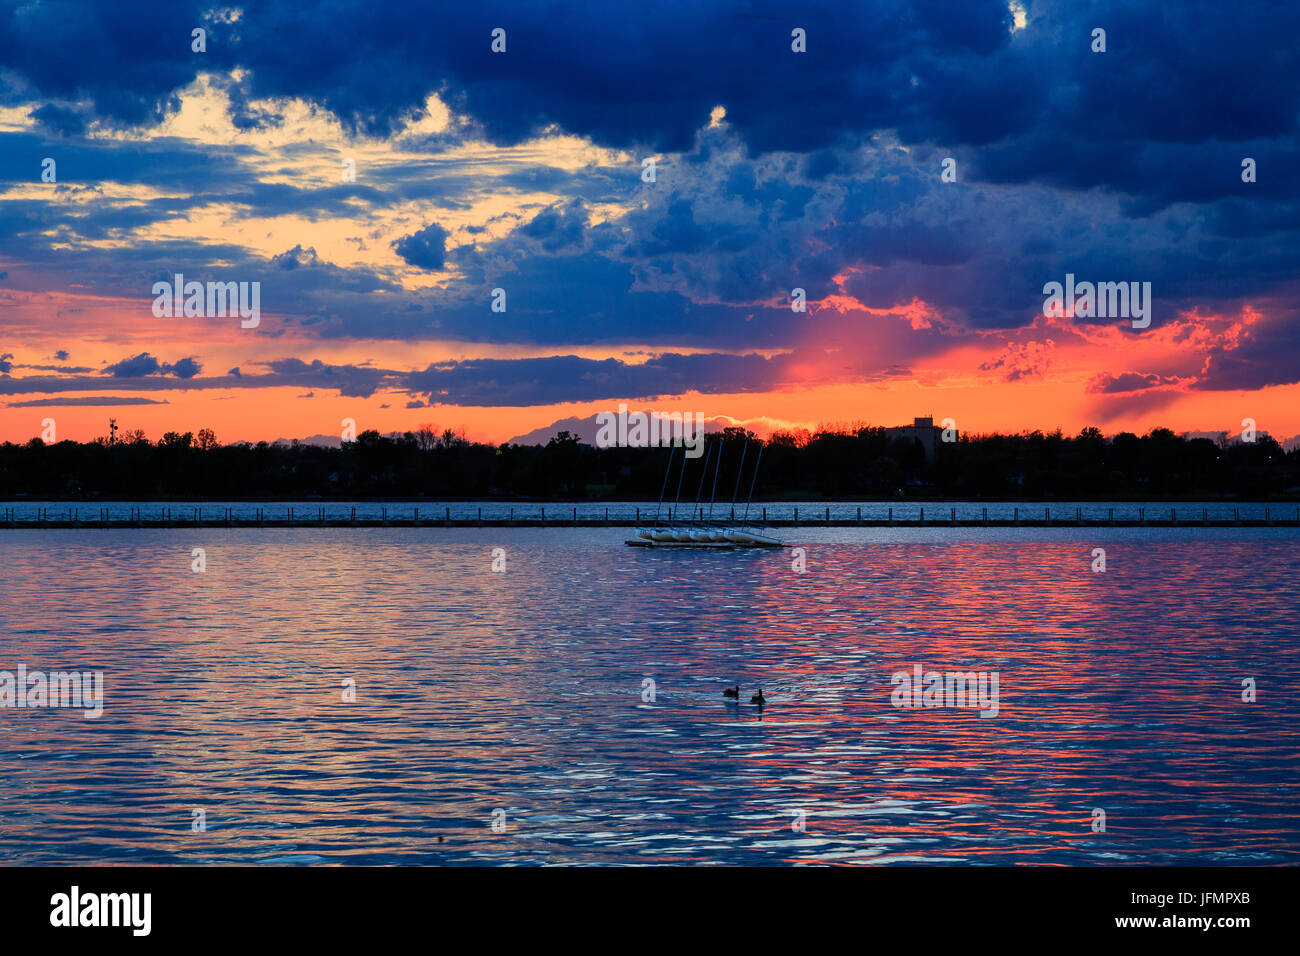 Boats, rocky shore, sunset on Lake Erie looking from Buffalo Park system. Sky is blue with orange ting. Stock Photo